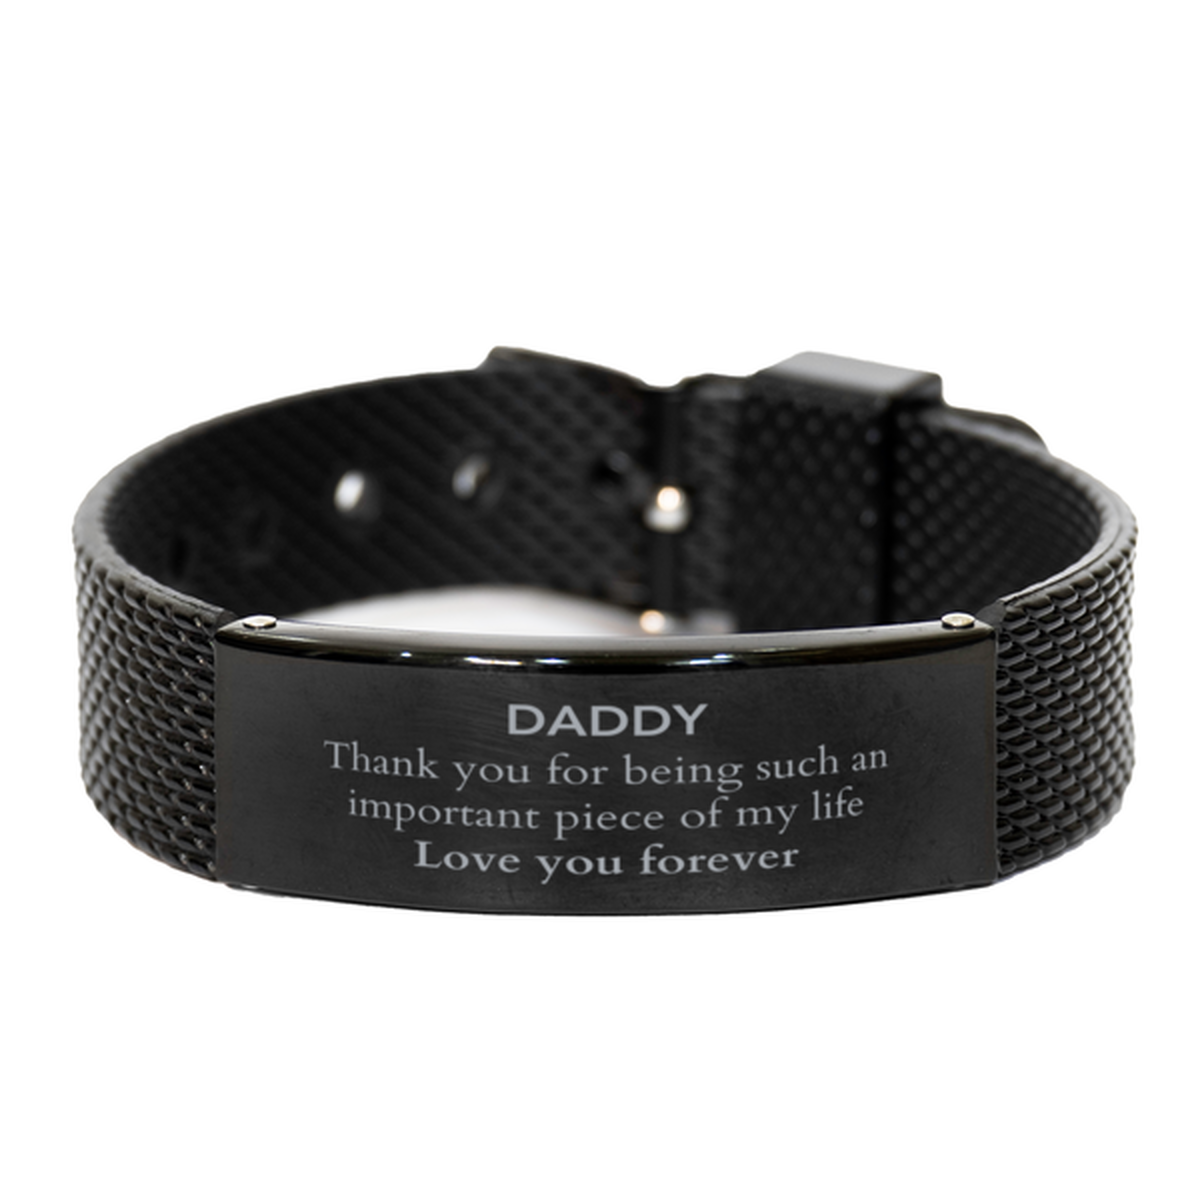 Appropriate Daddy Black Shark Mesh Bracelet Epic Birthday Gifts for Daddy Thank you for being such an important piece of my life Daddy Christmas Mothers Fathers Day